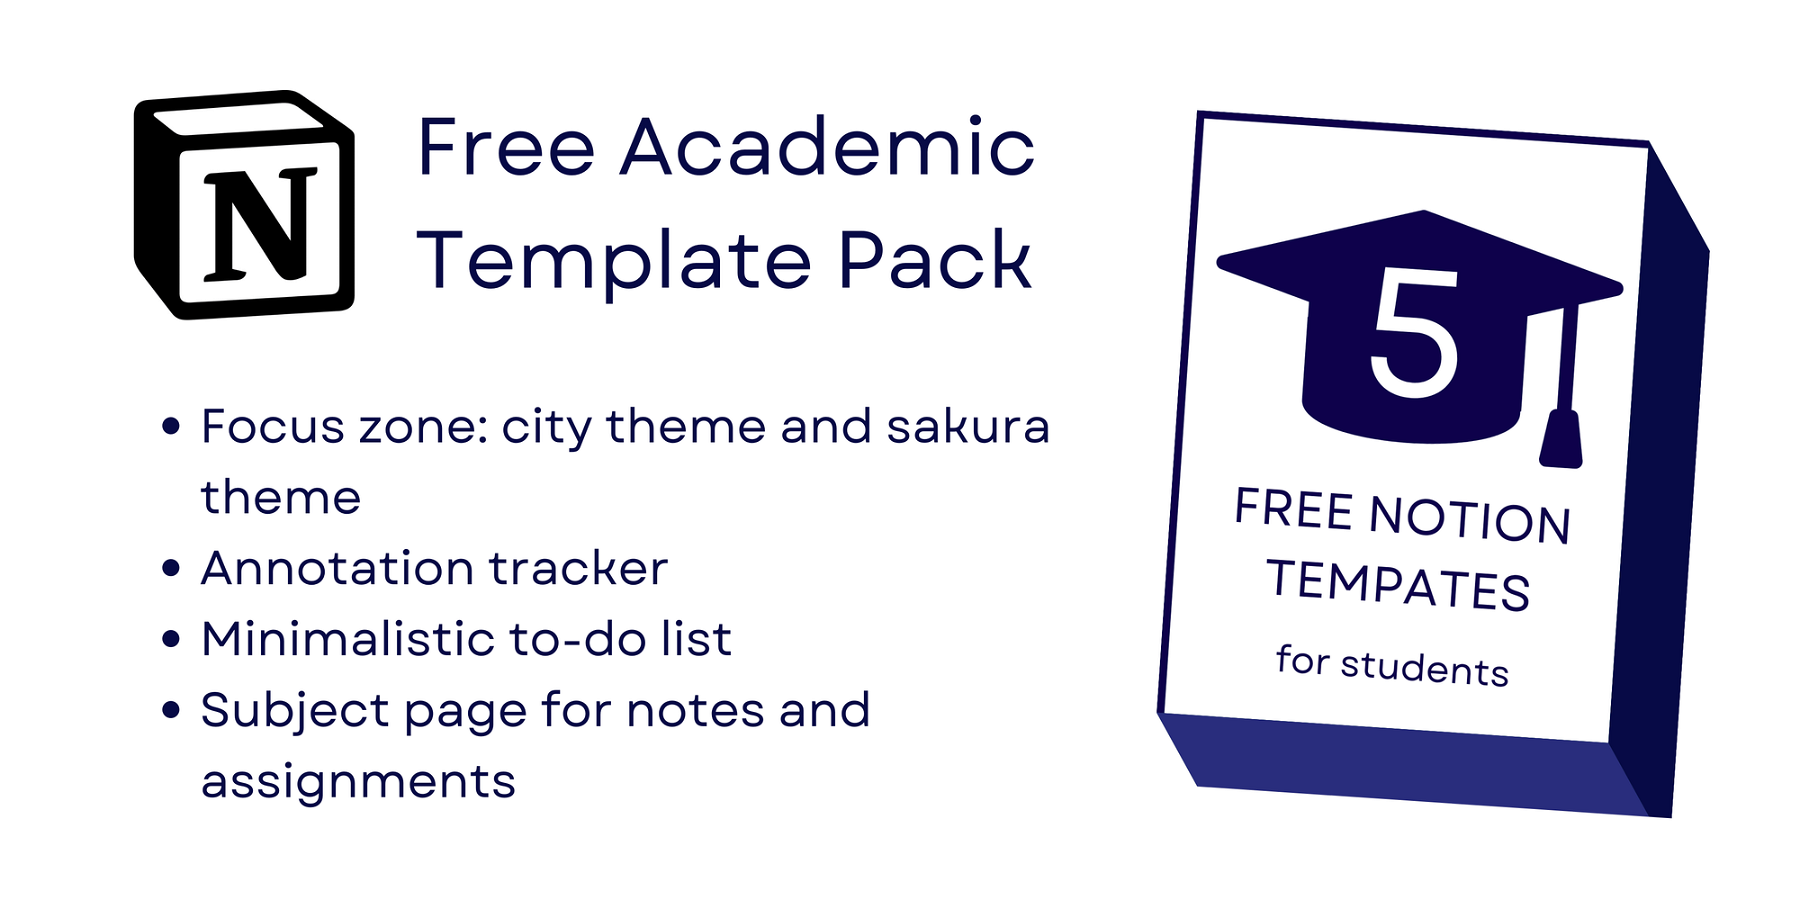 Academic Notion Template Pack | 5 Free Templates for Students